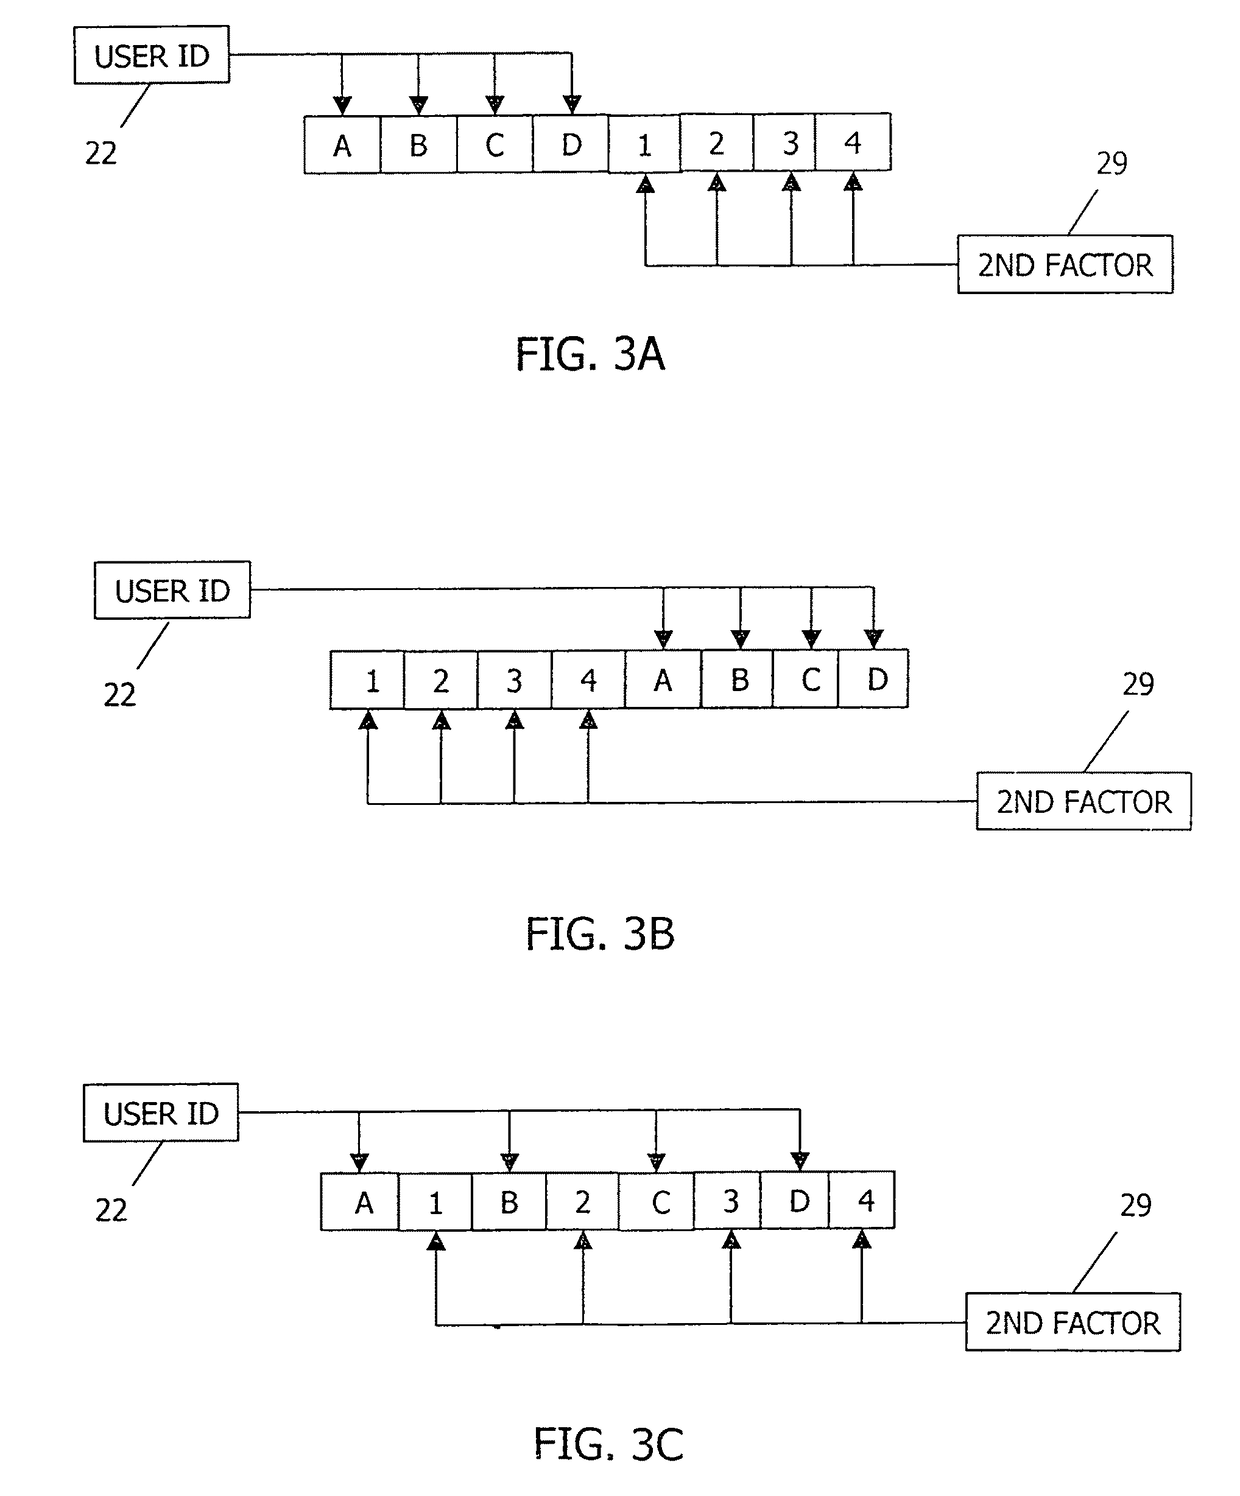 Apparatus, system, and method for generating and authenticating a computer password